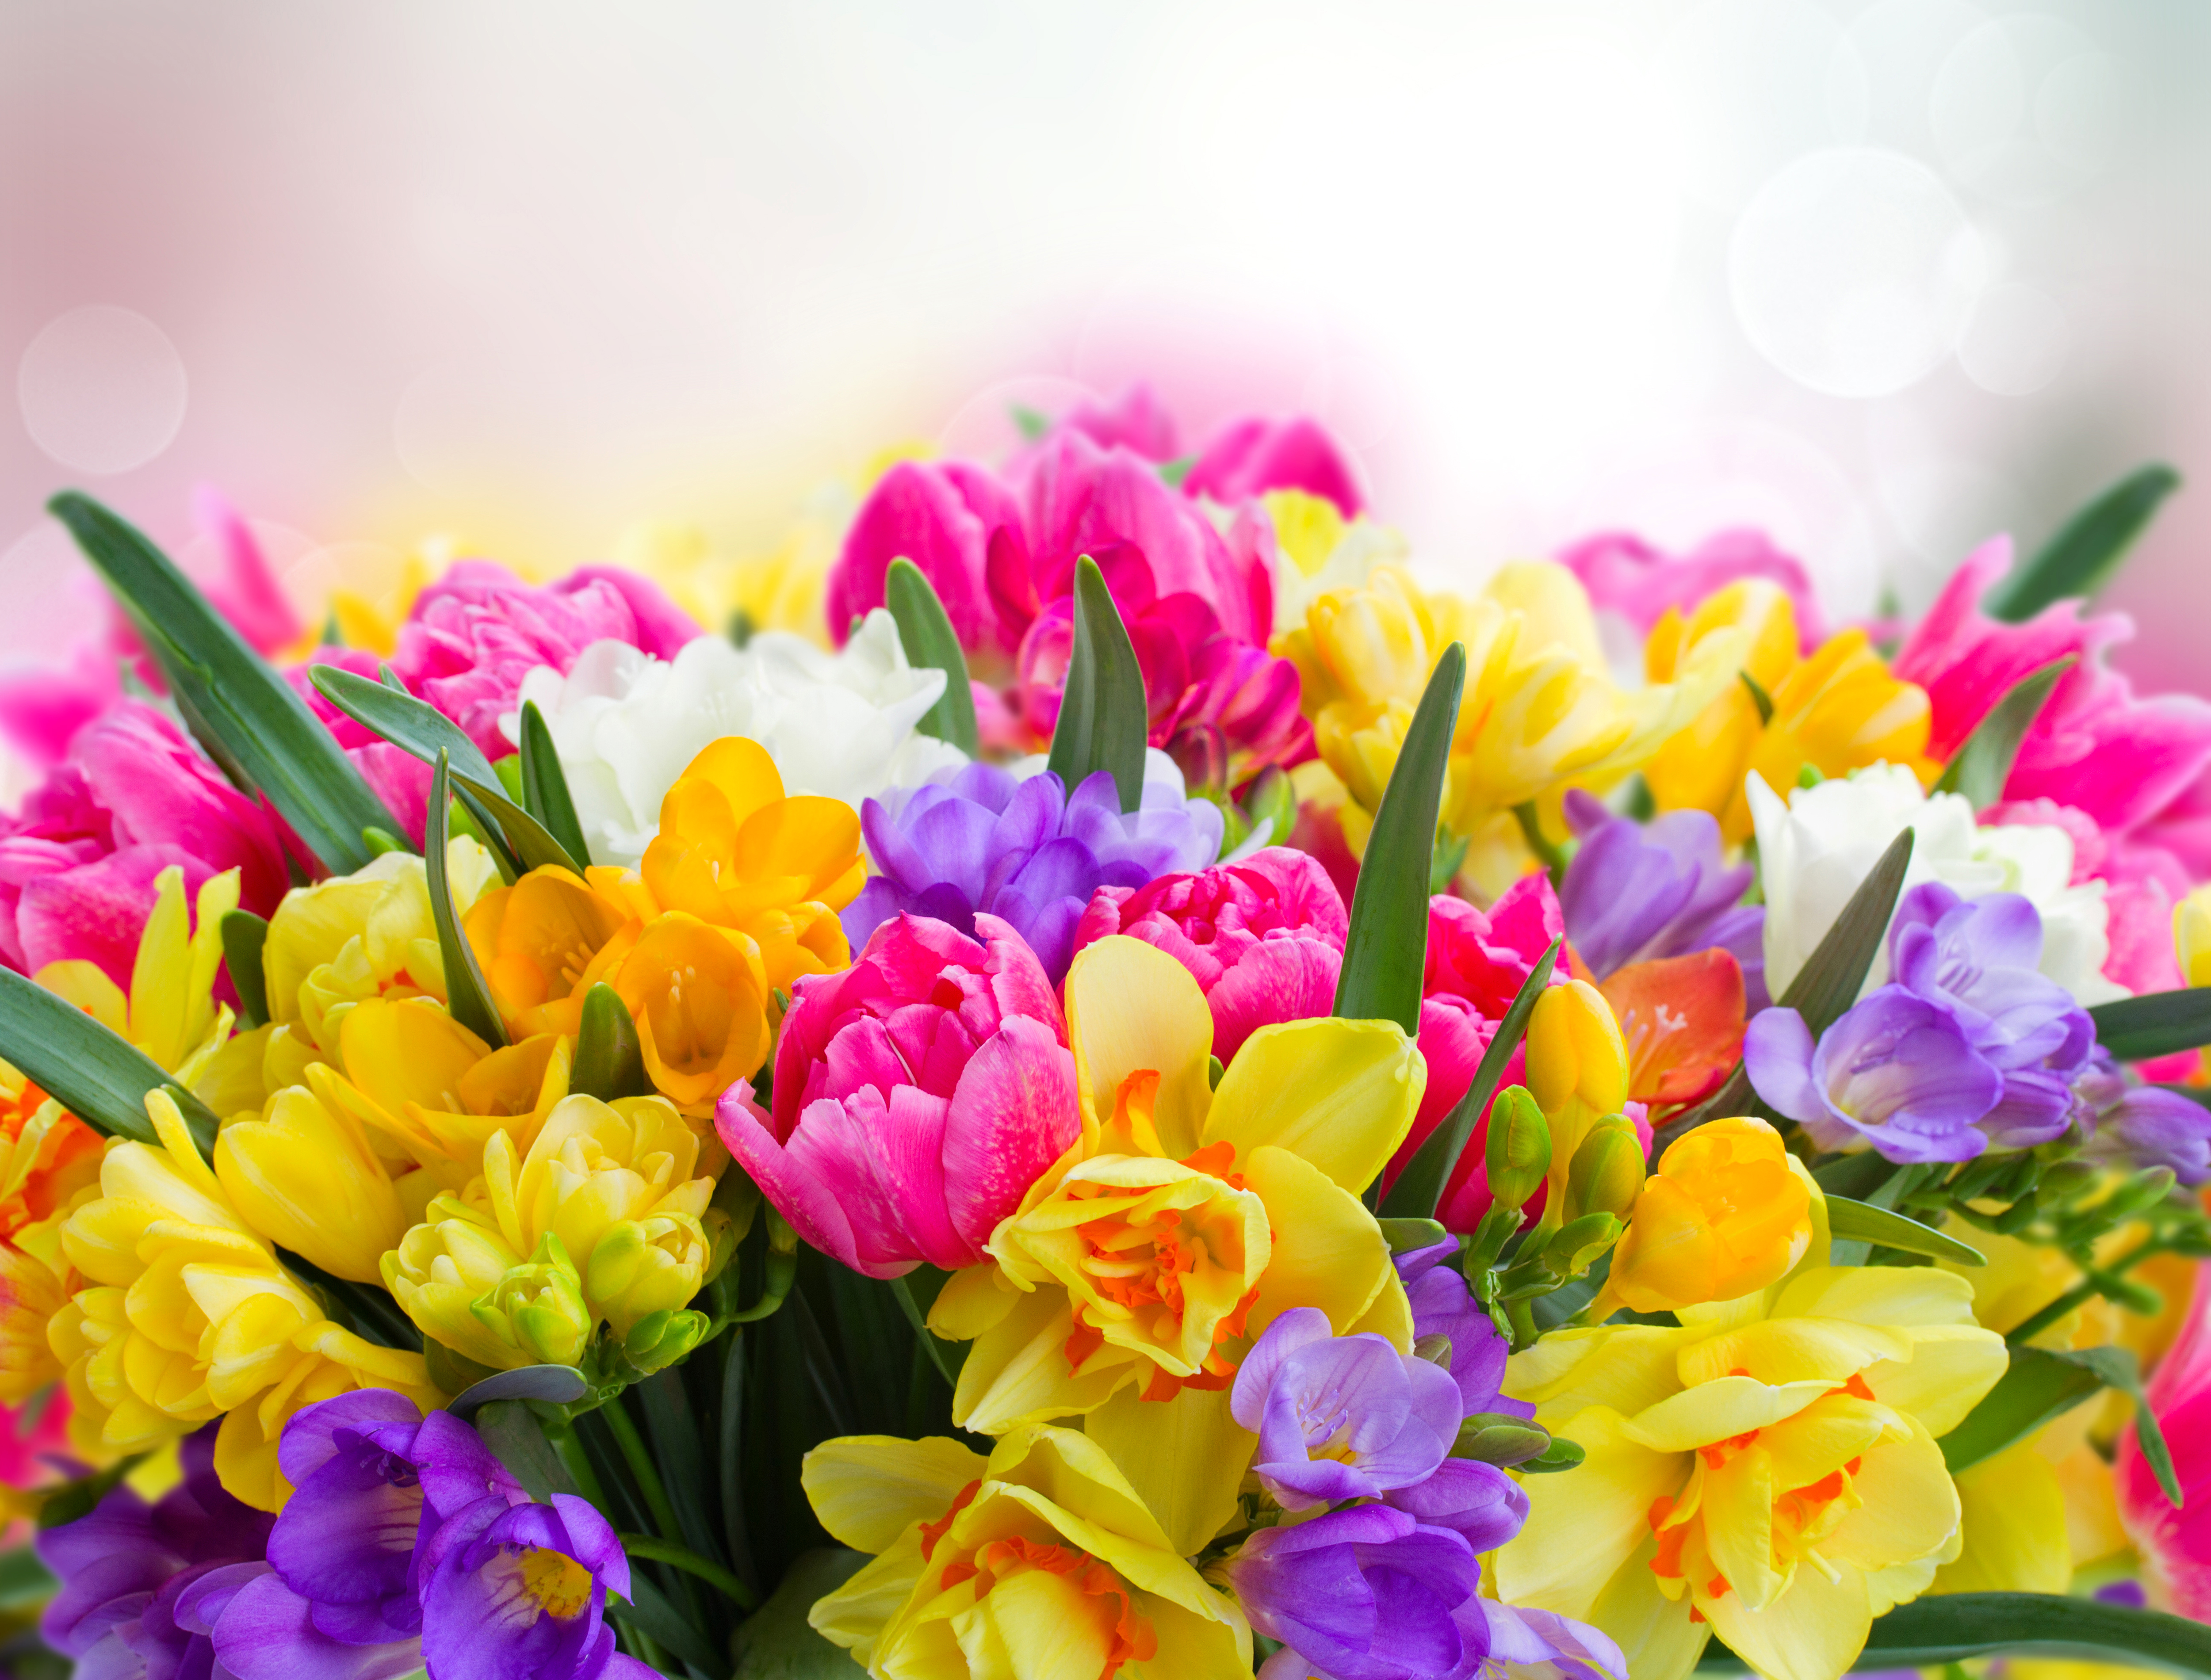 android purple flower, yellow flower, flowers, pink flower, earth, flower, colorful, colors